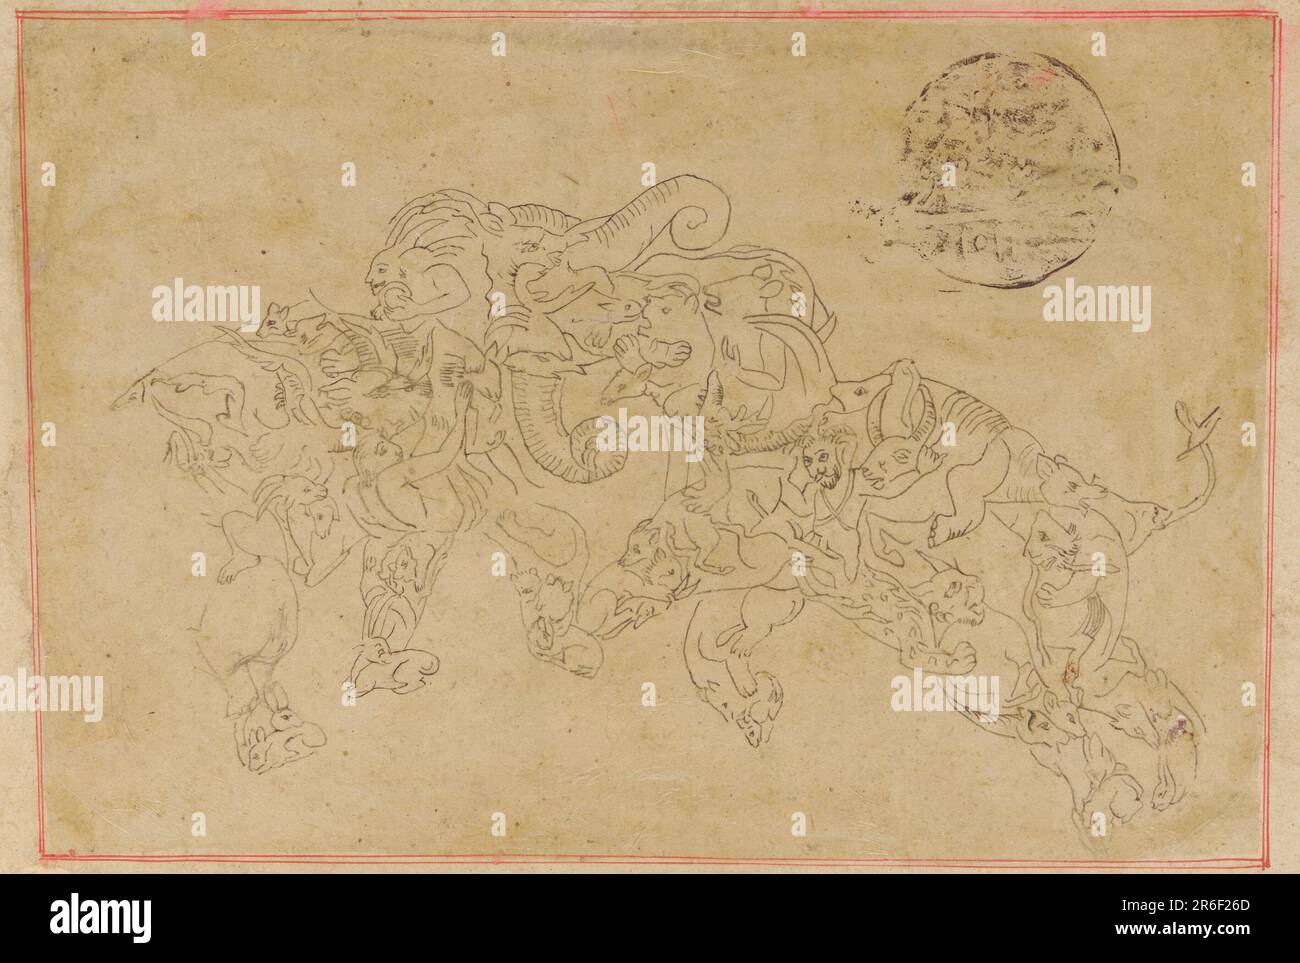 Two composite elephants, fighting. Date: 18th century. Origin: India. Tracing and color on paper. Period: Possibly Mughal dynasty. Museum: Freer Gallery of Art and Arthur M. Sackler Gallery. Stock Photo